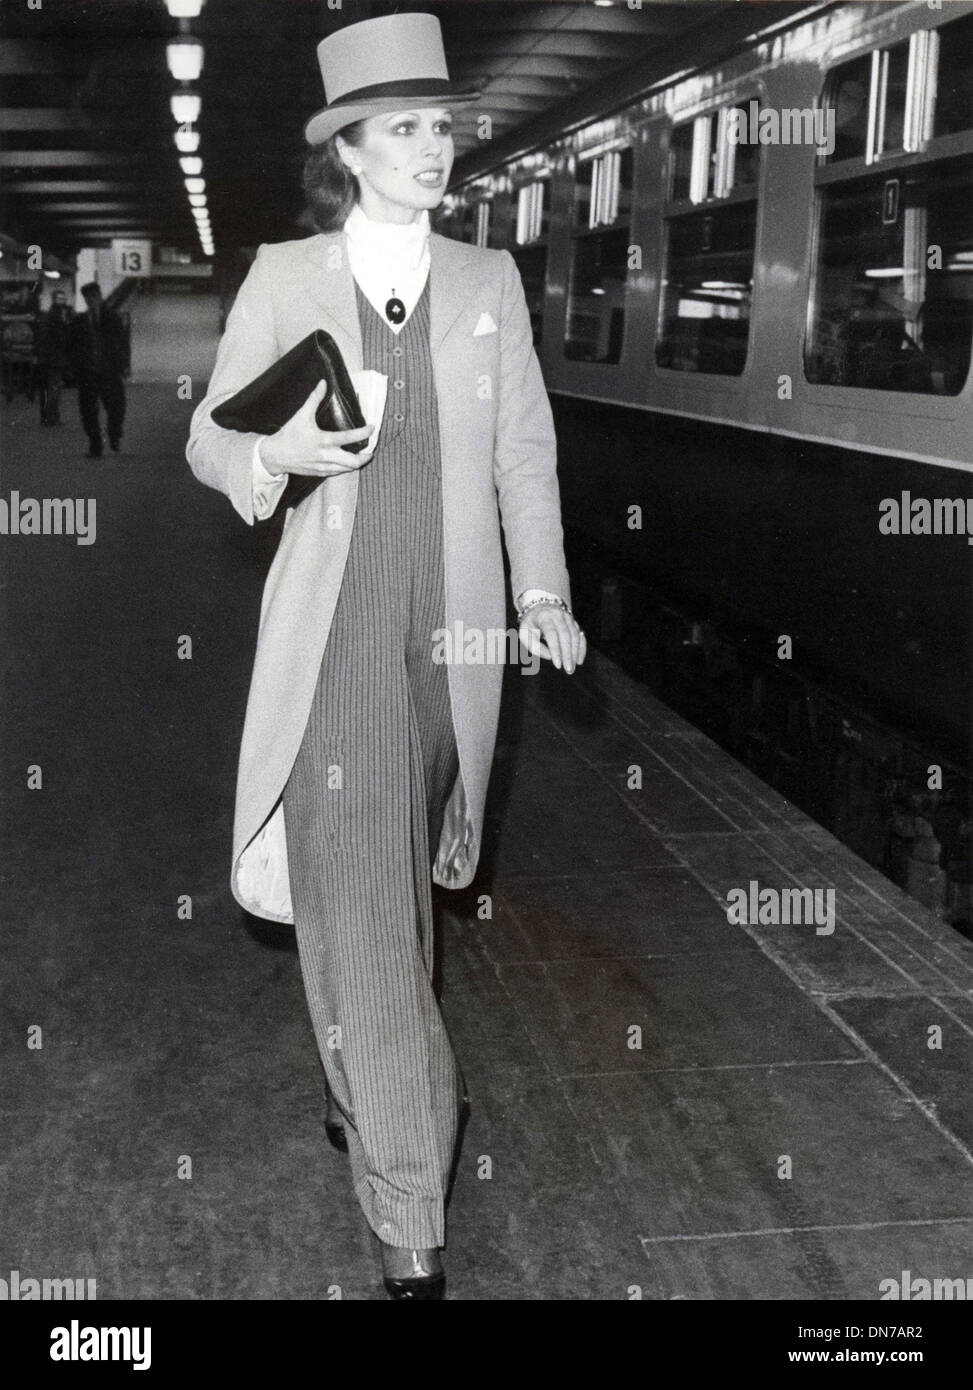 Mar. 10, 1975 - London, England, U.K. - Actress JOANNA LUMLEY stole the show when she arrived wearing a tail-coat and top hat for the wedding of Earl of Lichfield and Lady Leonora Grosvenor. Stock Photo